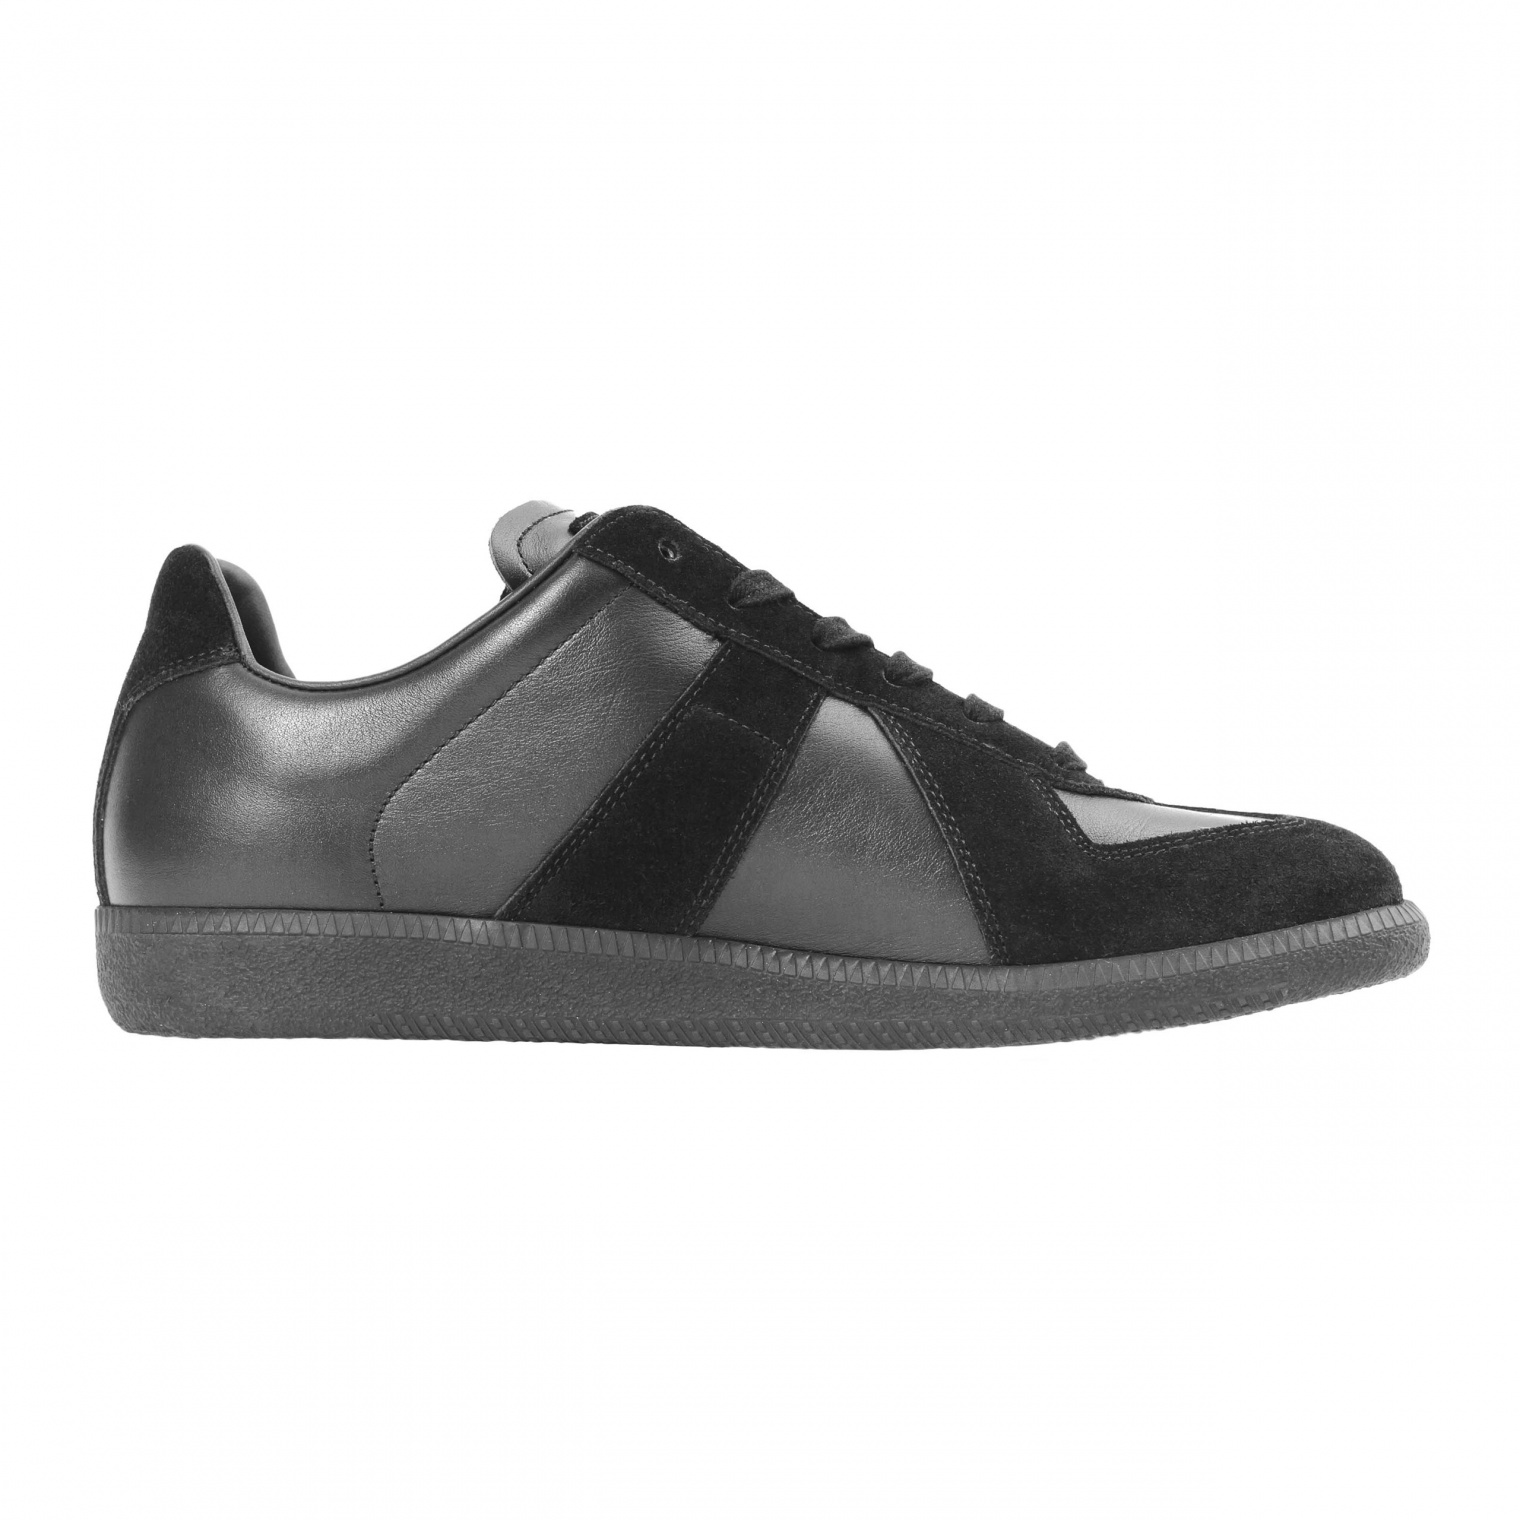 sour wall Luxury Buy Maison Margiela men black leather replica sneakers for $449 online on  SV77, S57WS0236/P1897/900